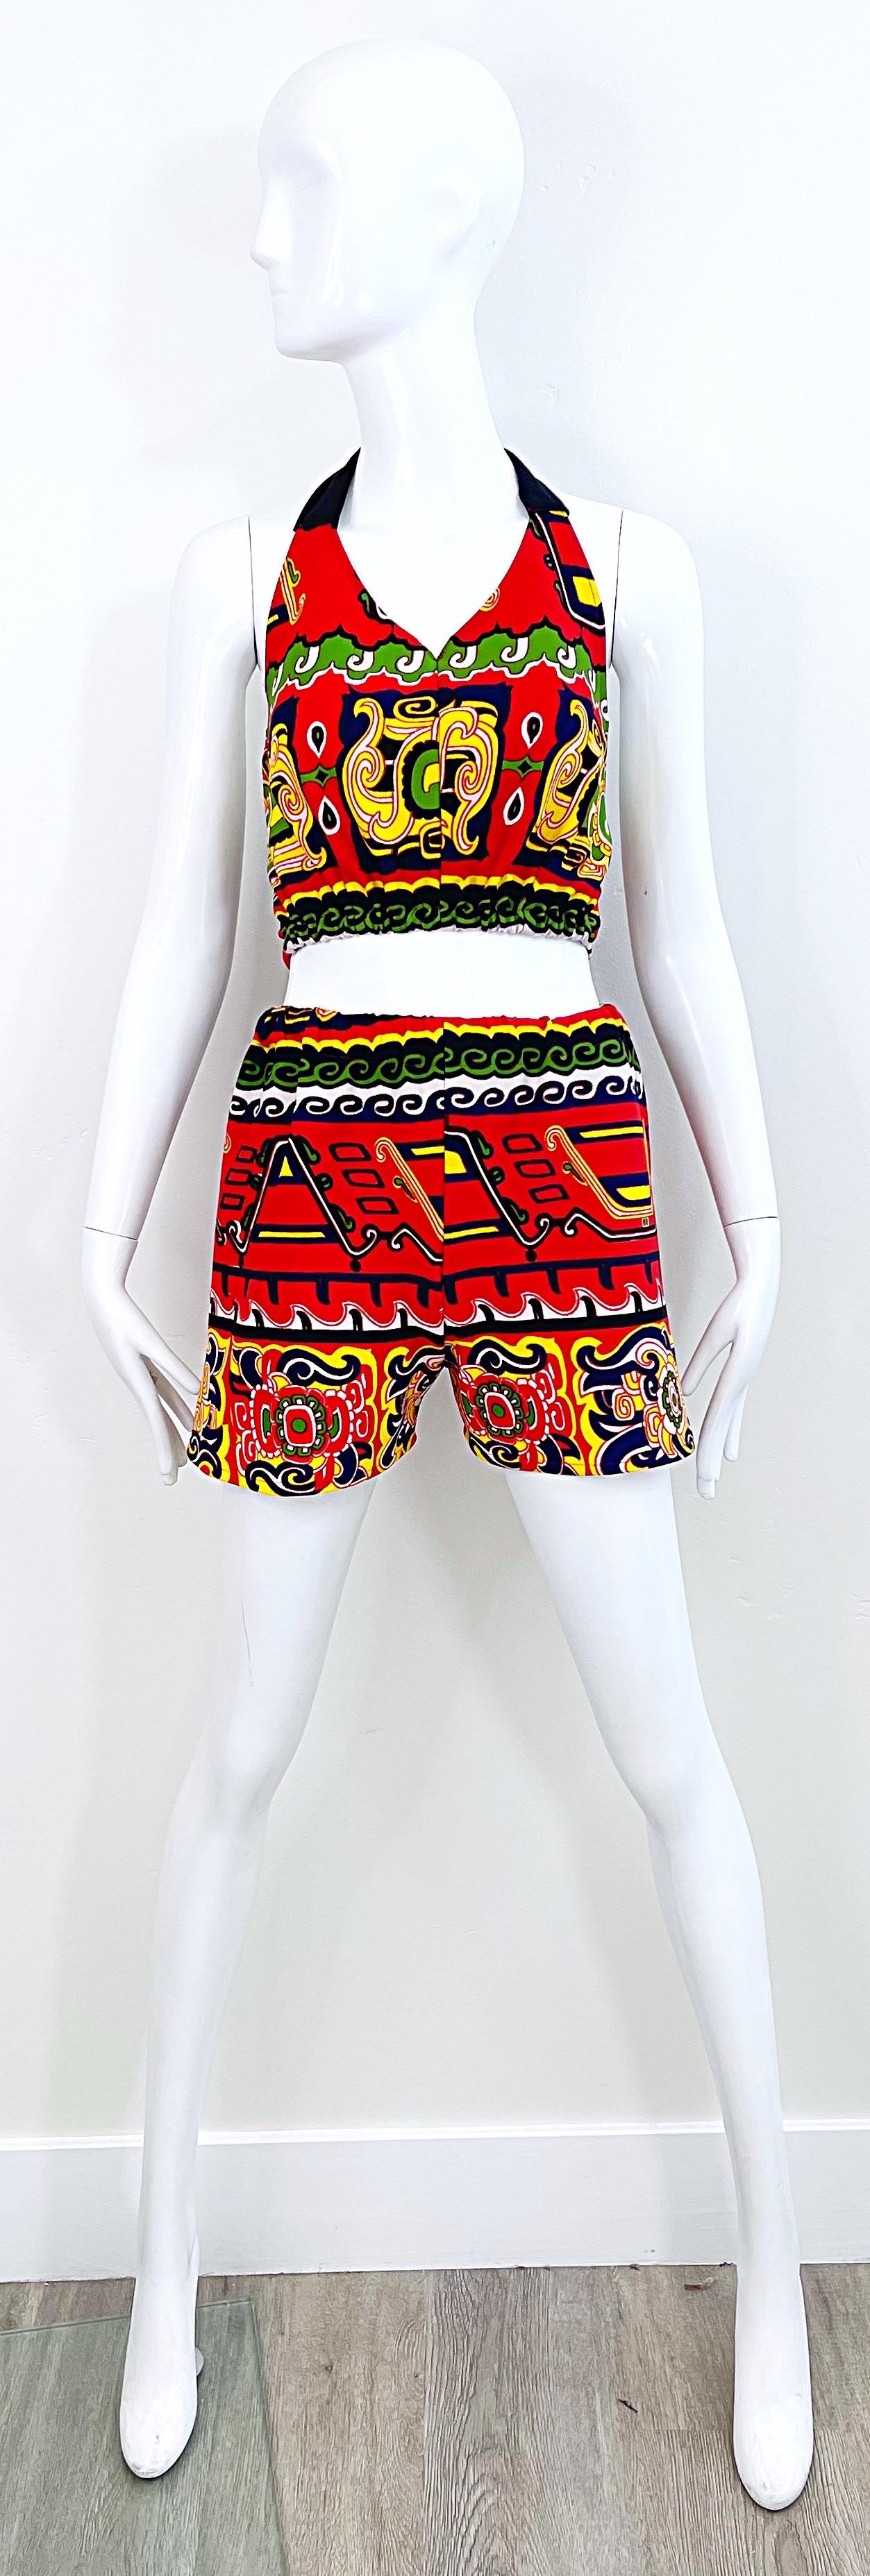 Amazing 1970s festive tribal abstract print knit crop halter top and hot pants / shorts ! Features vibrant colors of red, green, yellow, and navy blue throughout. Elastic waistband on the top and on the waistband of the shorts. Both pieces great